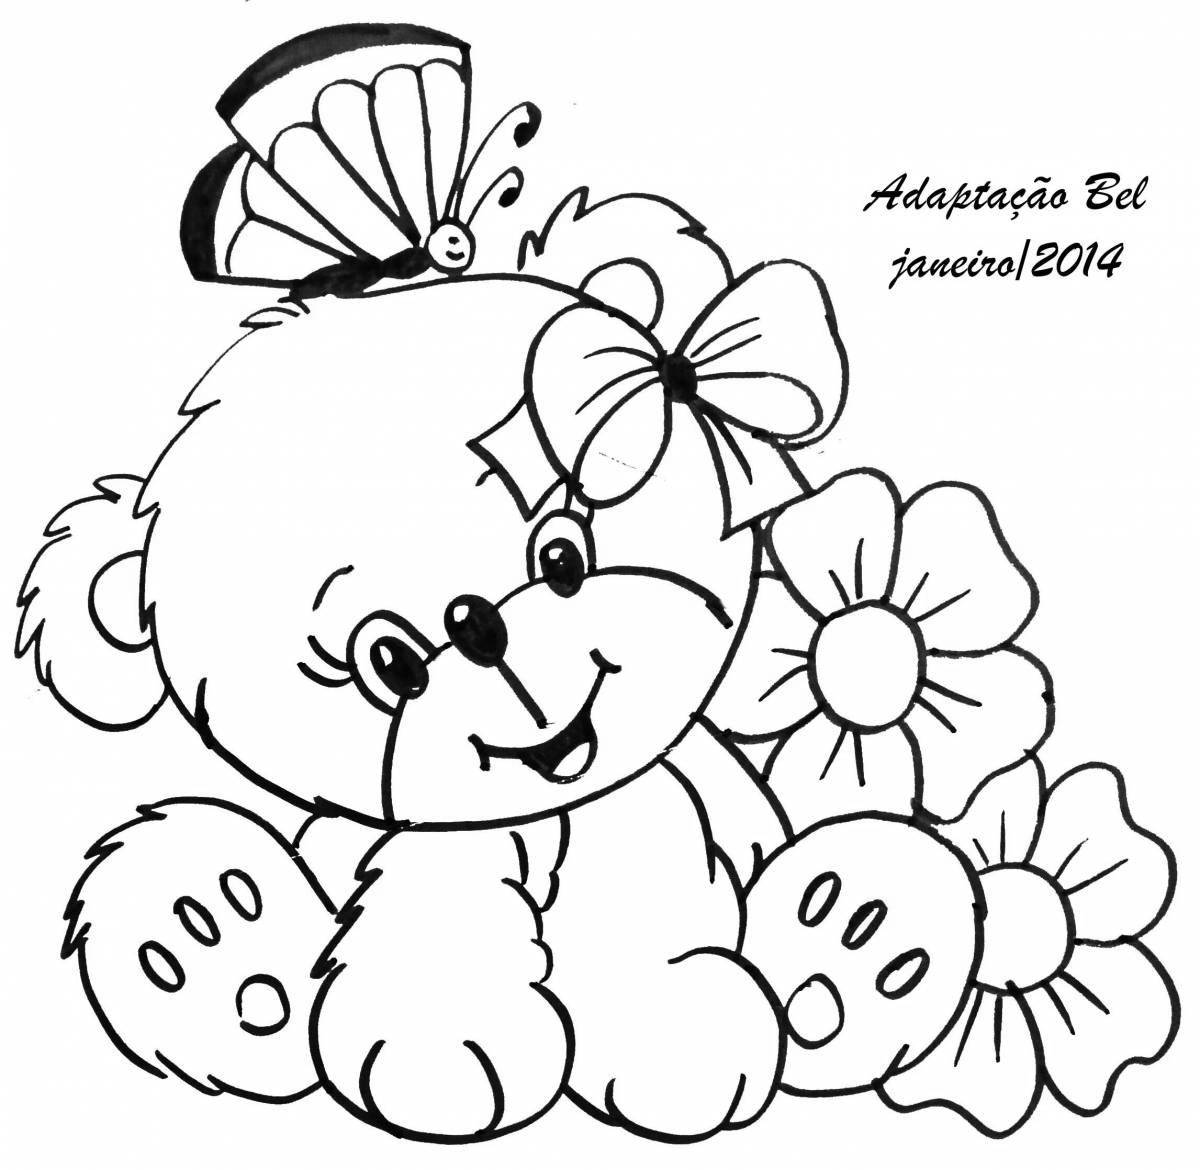 Adorable teddy bear with a bow coloring